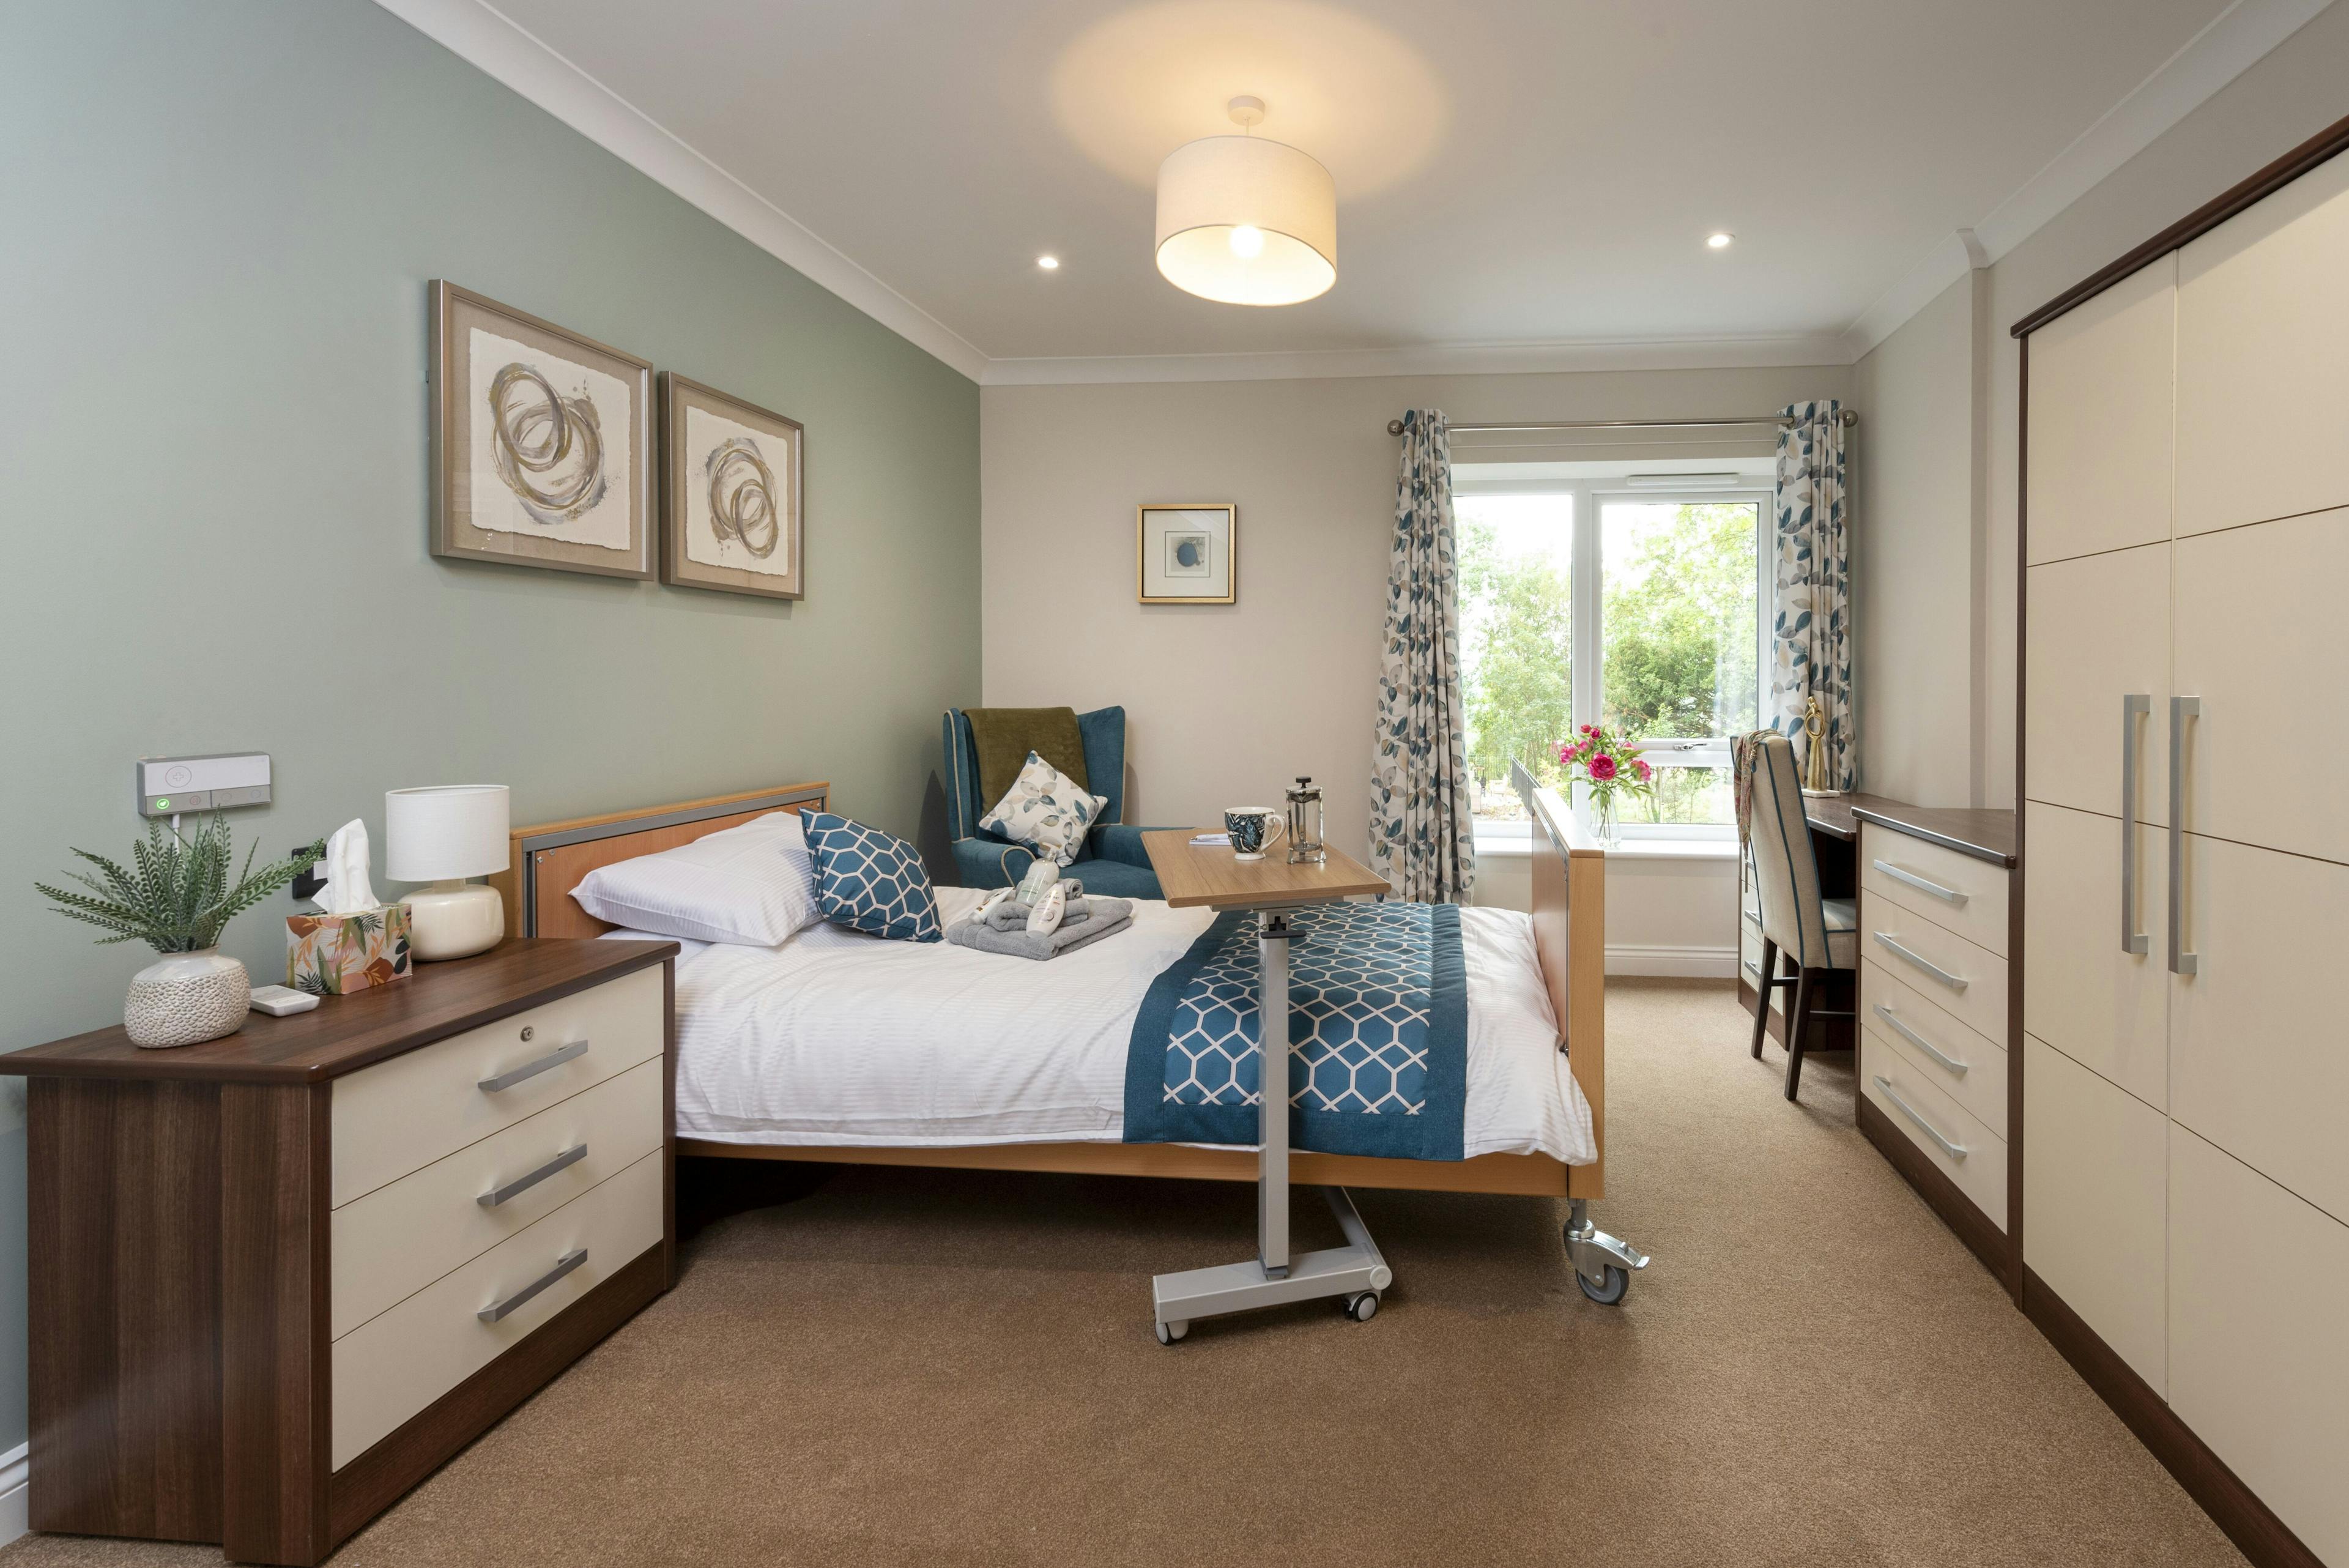 Brendoncare - Brendoncare St Giles View care home 2